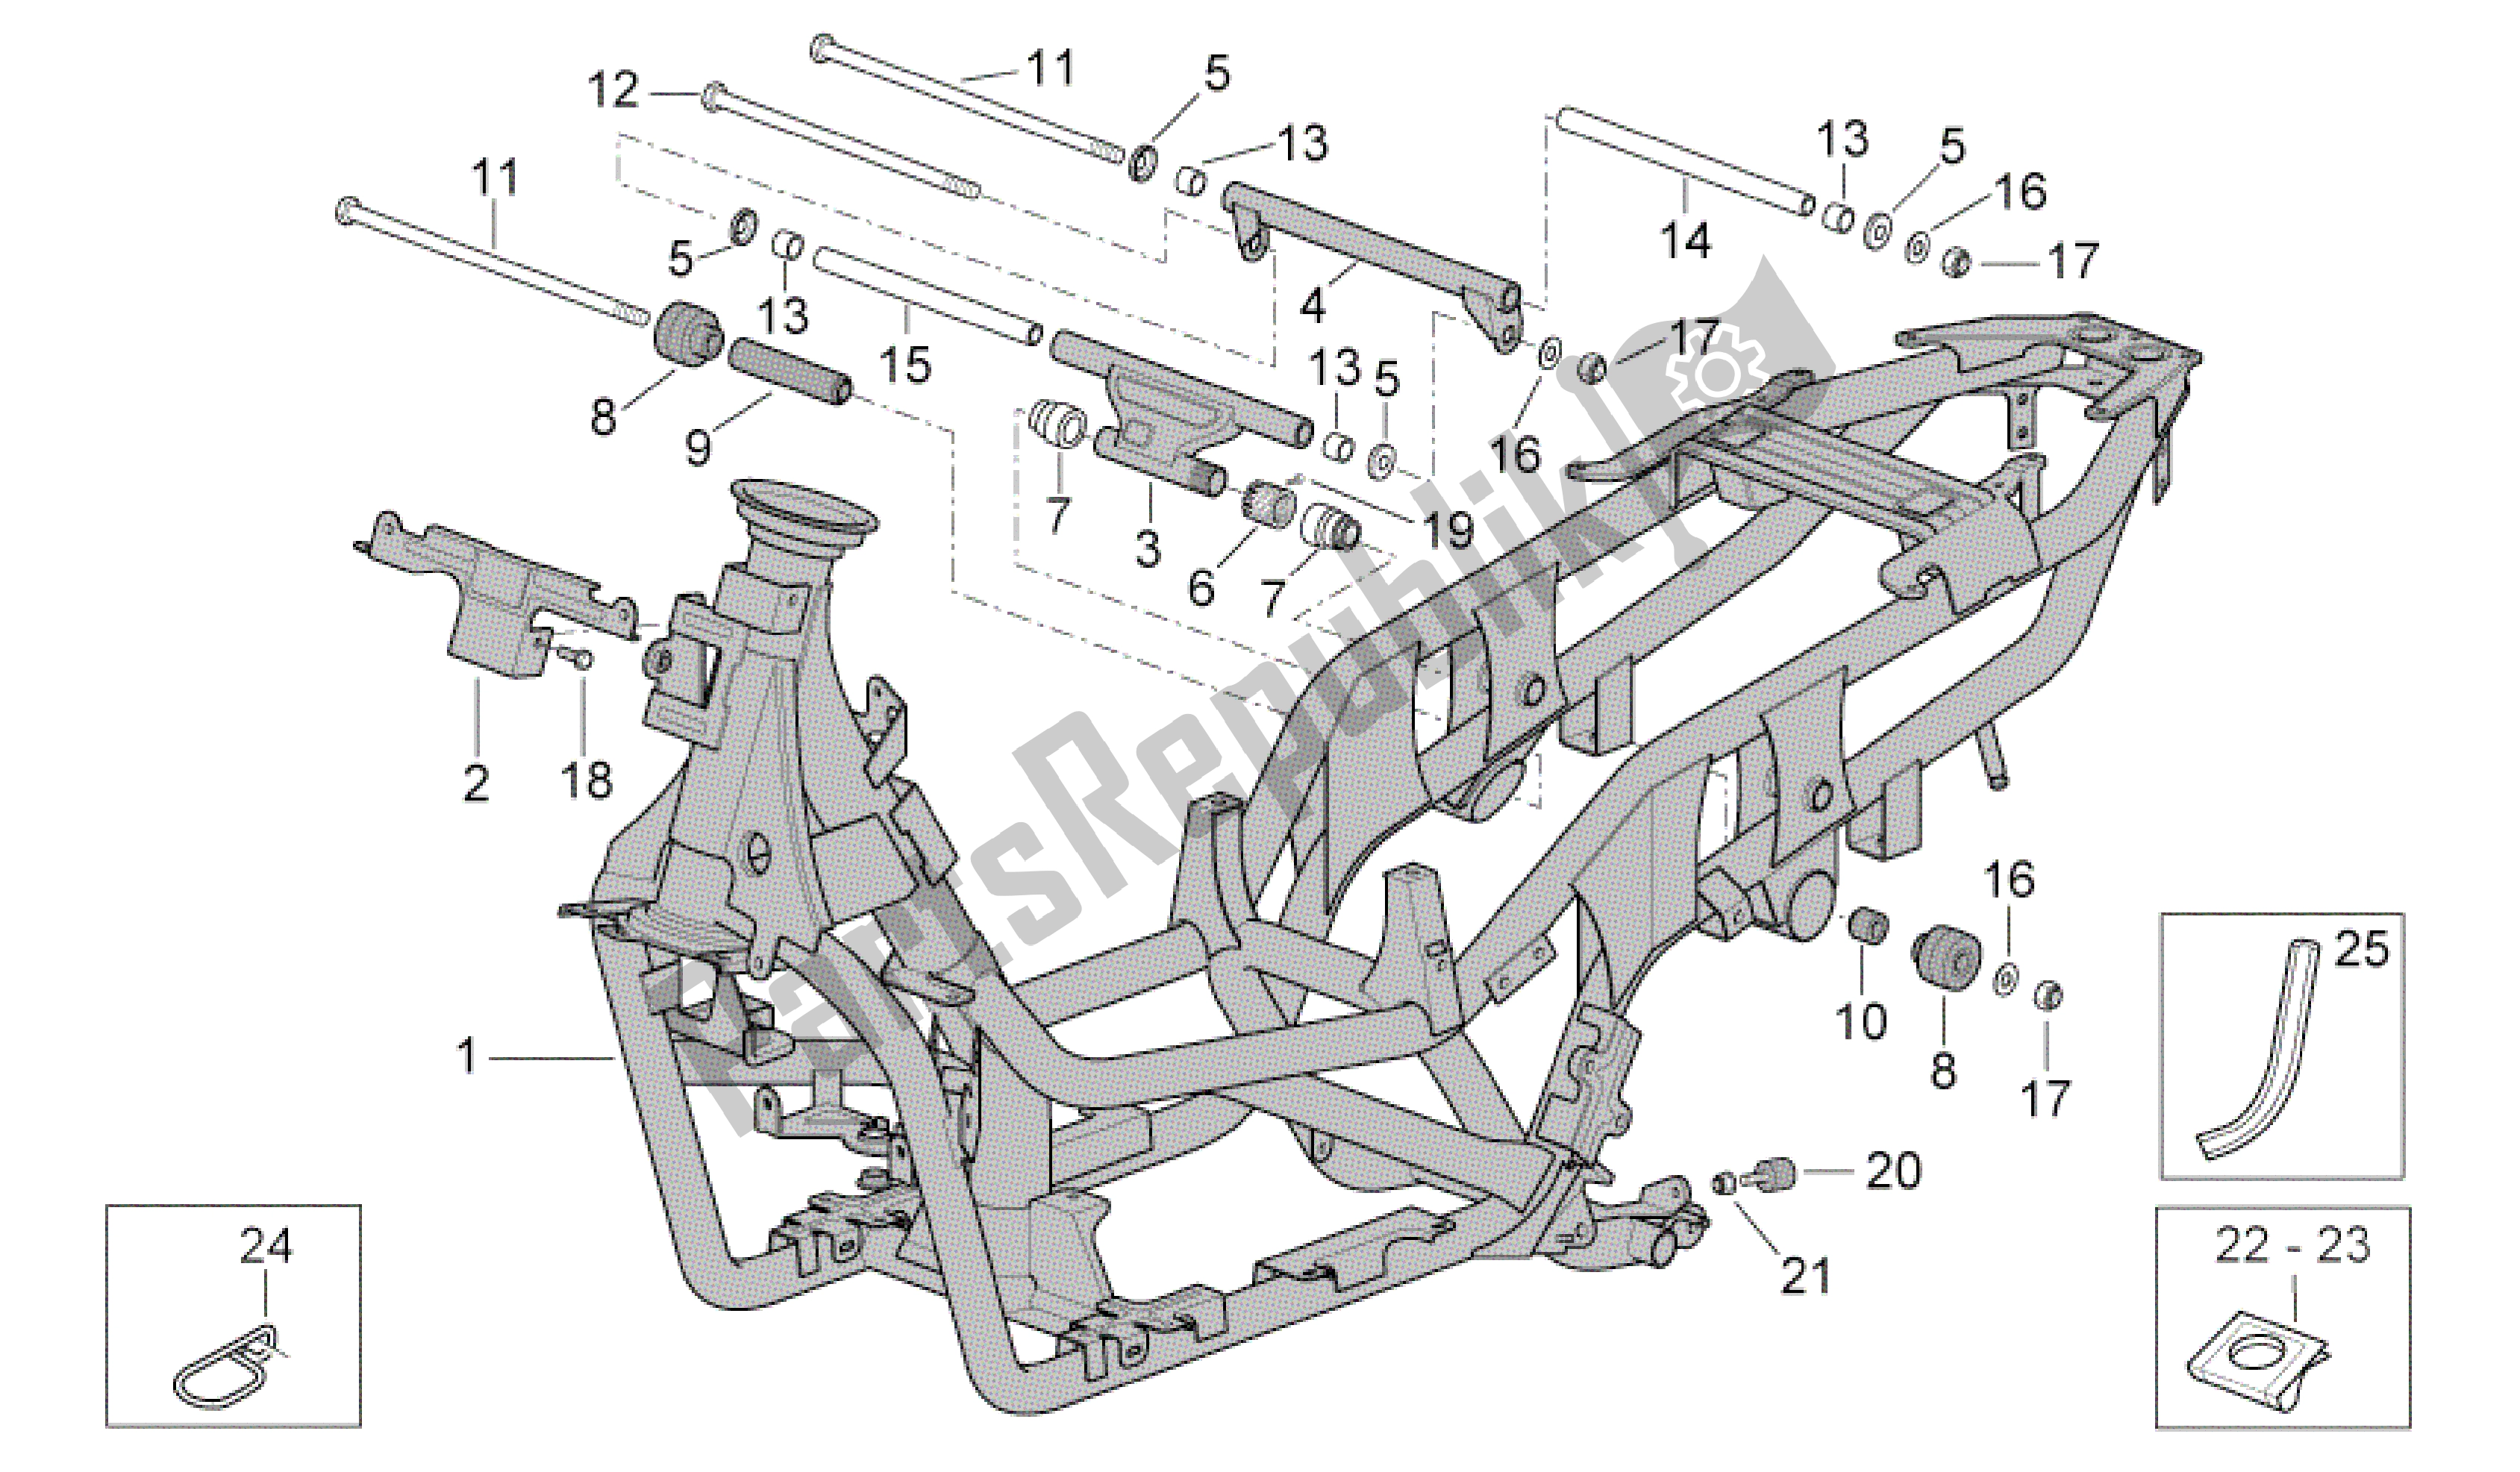 All parts for the Frame of the Aprilia Scarabeo 500 2003 - 2006